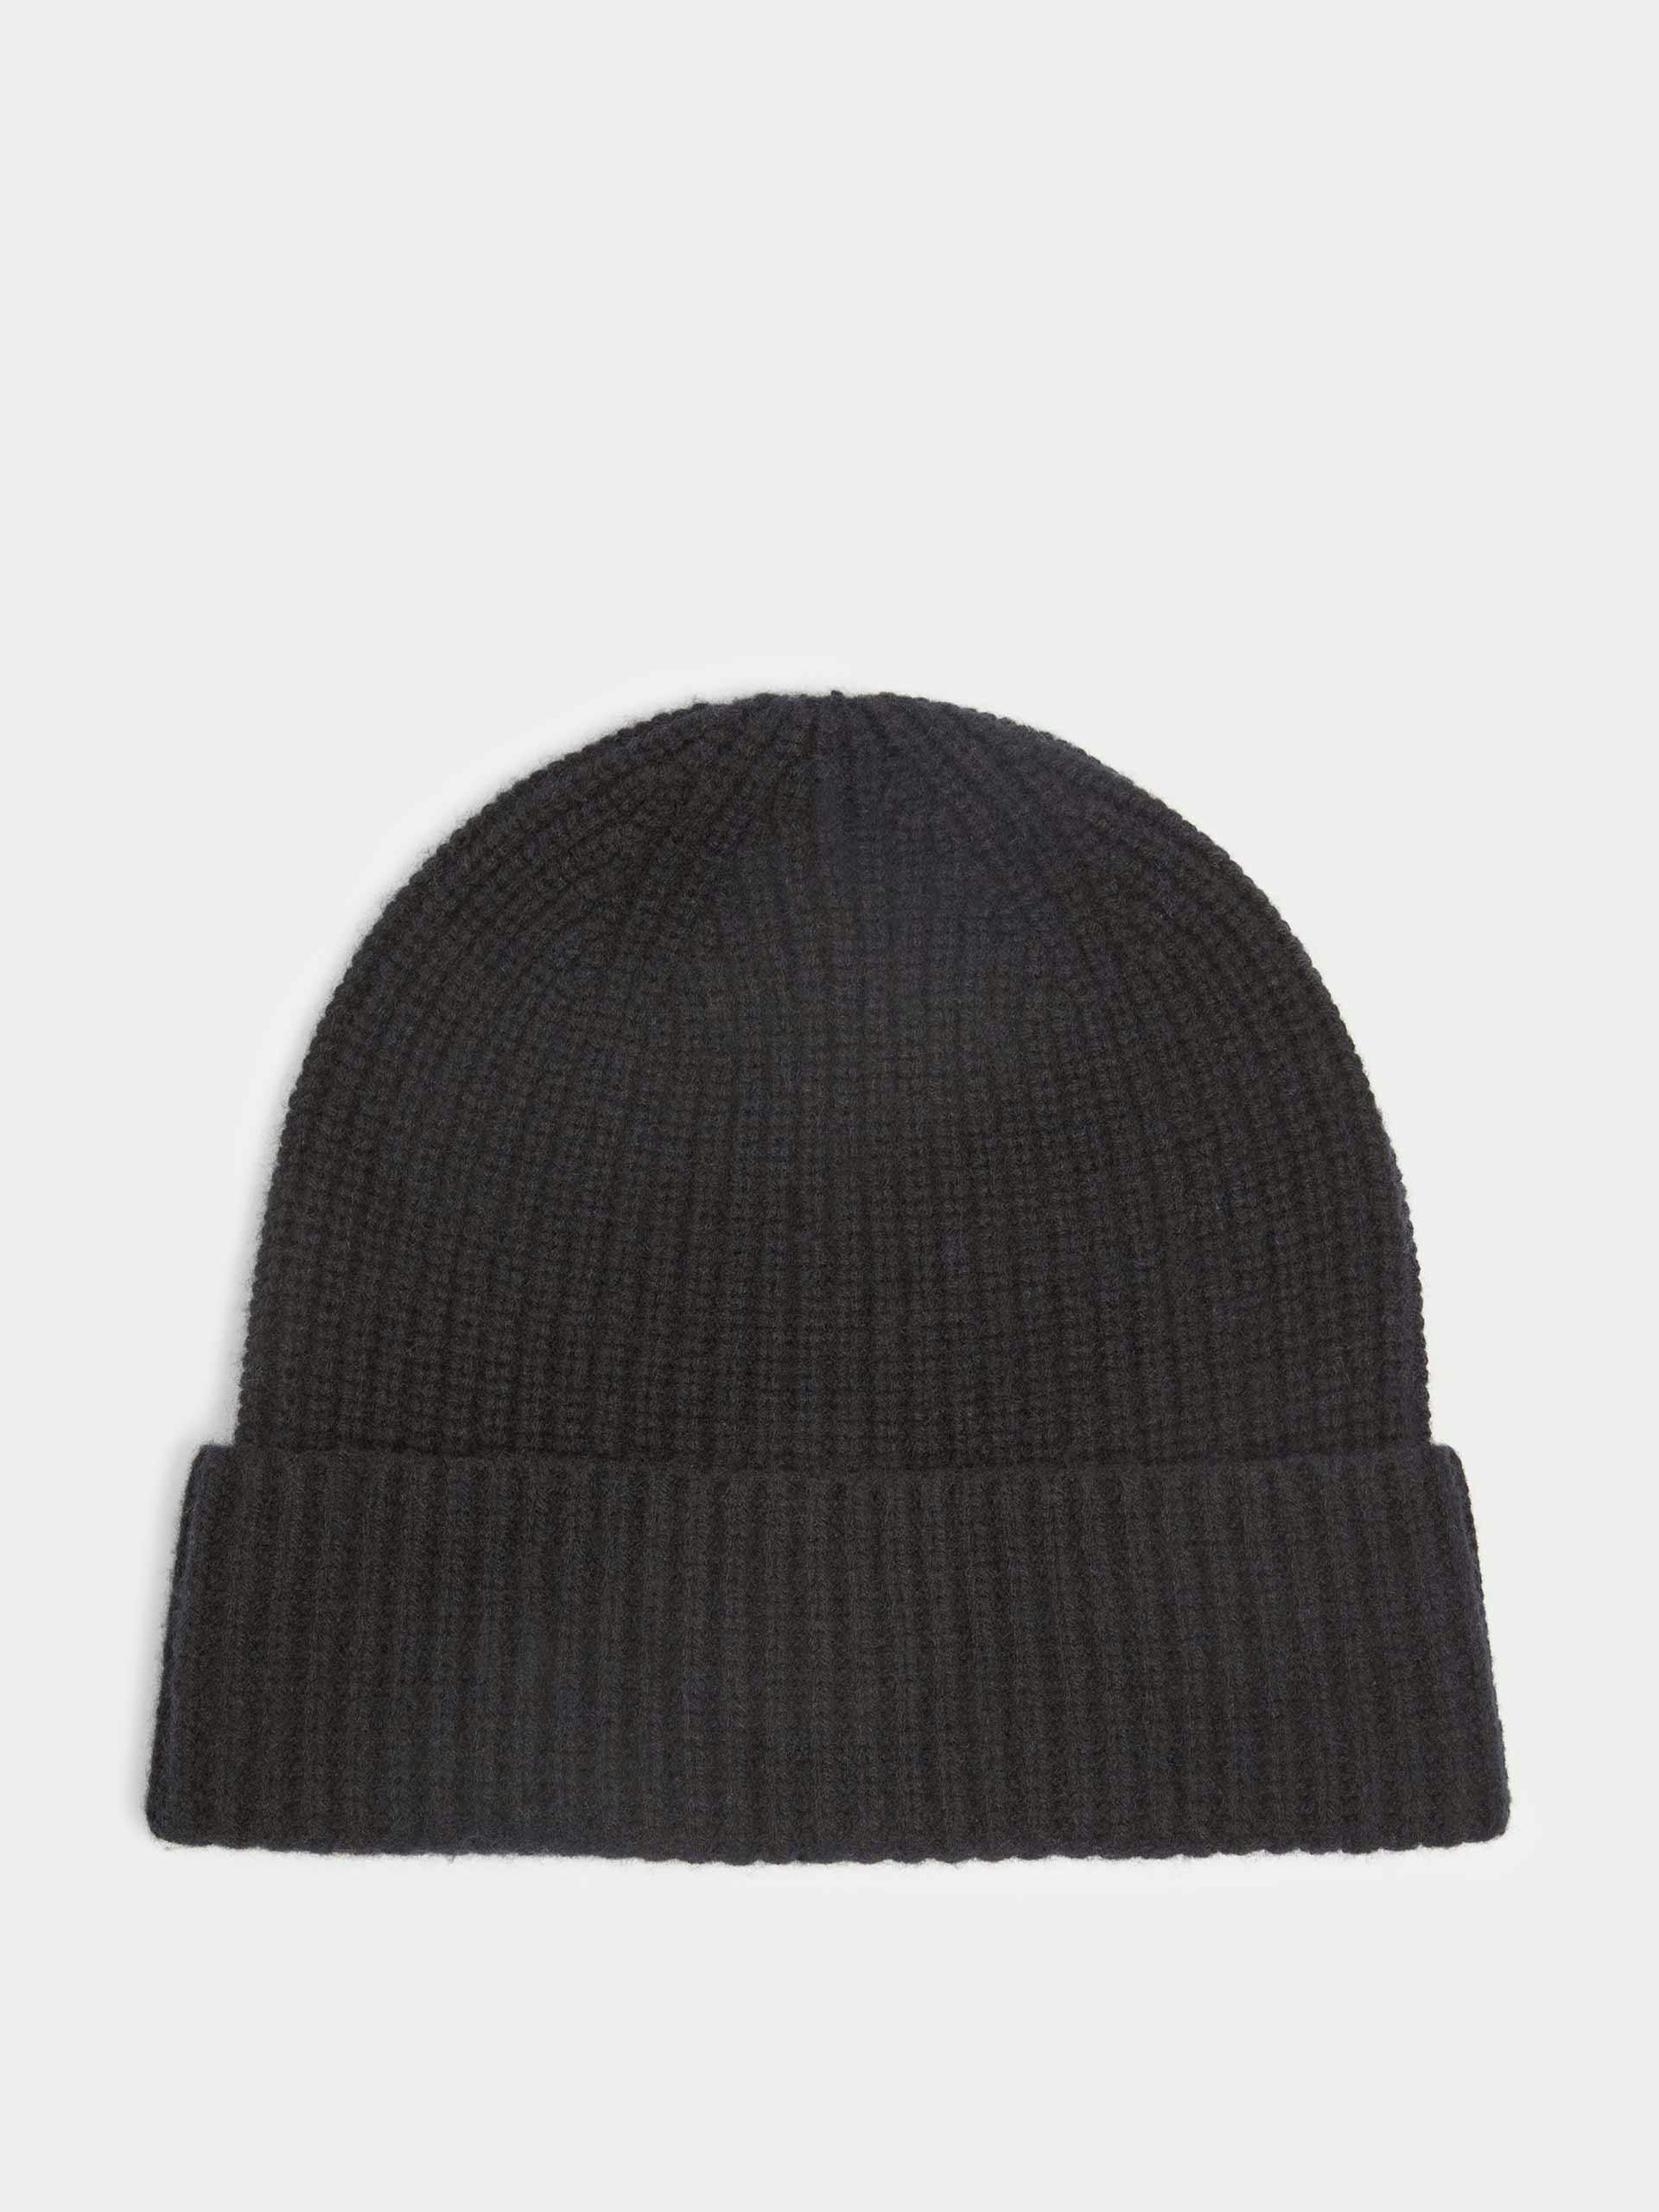 Black knitted cashmere beanie